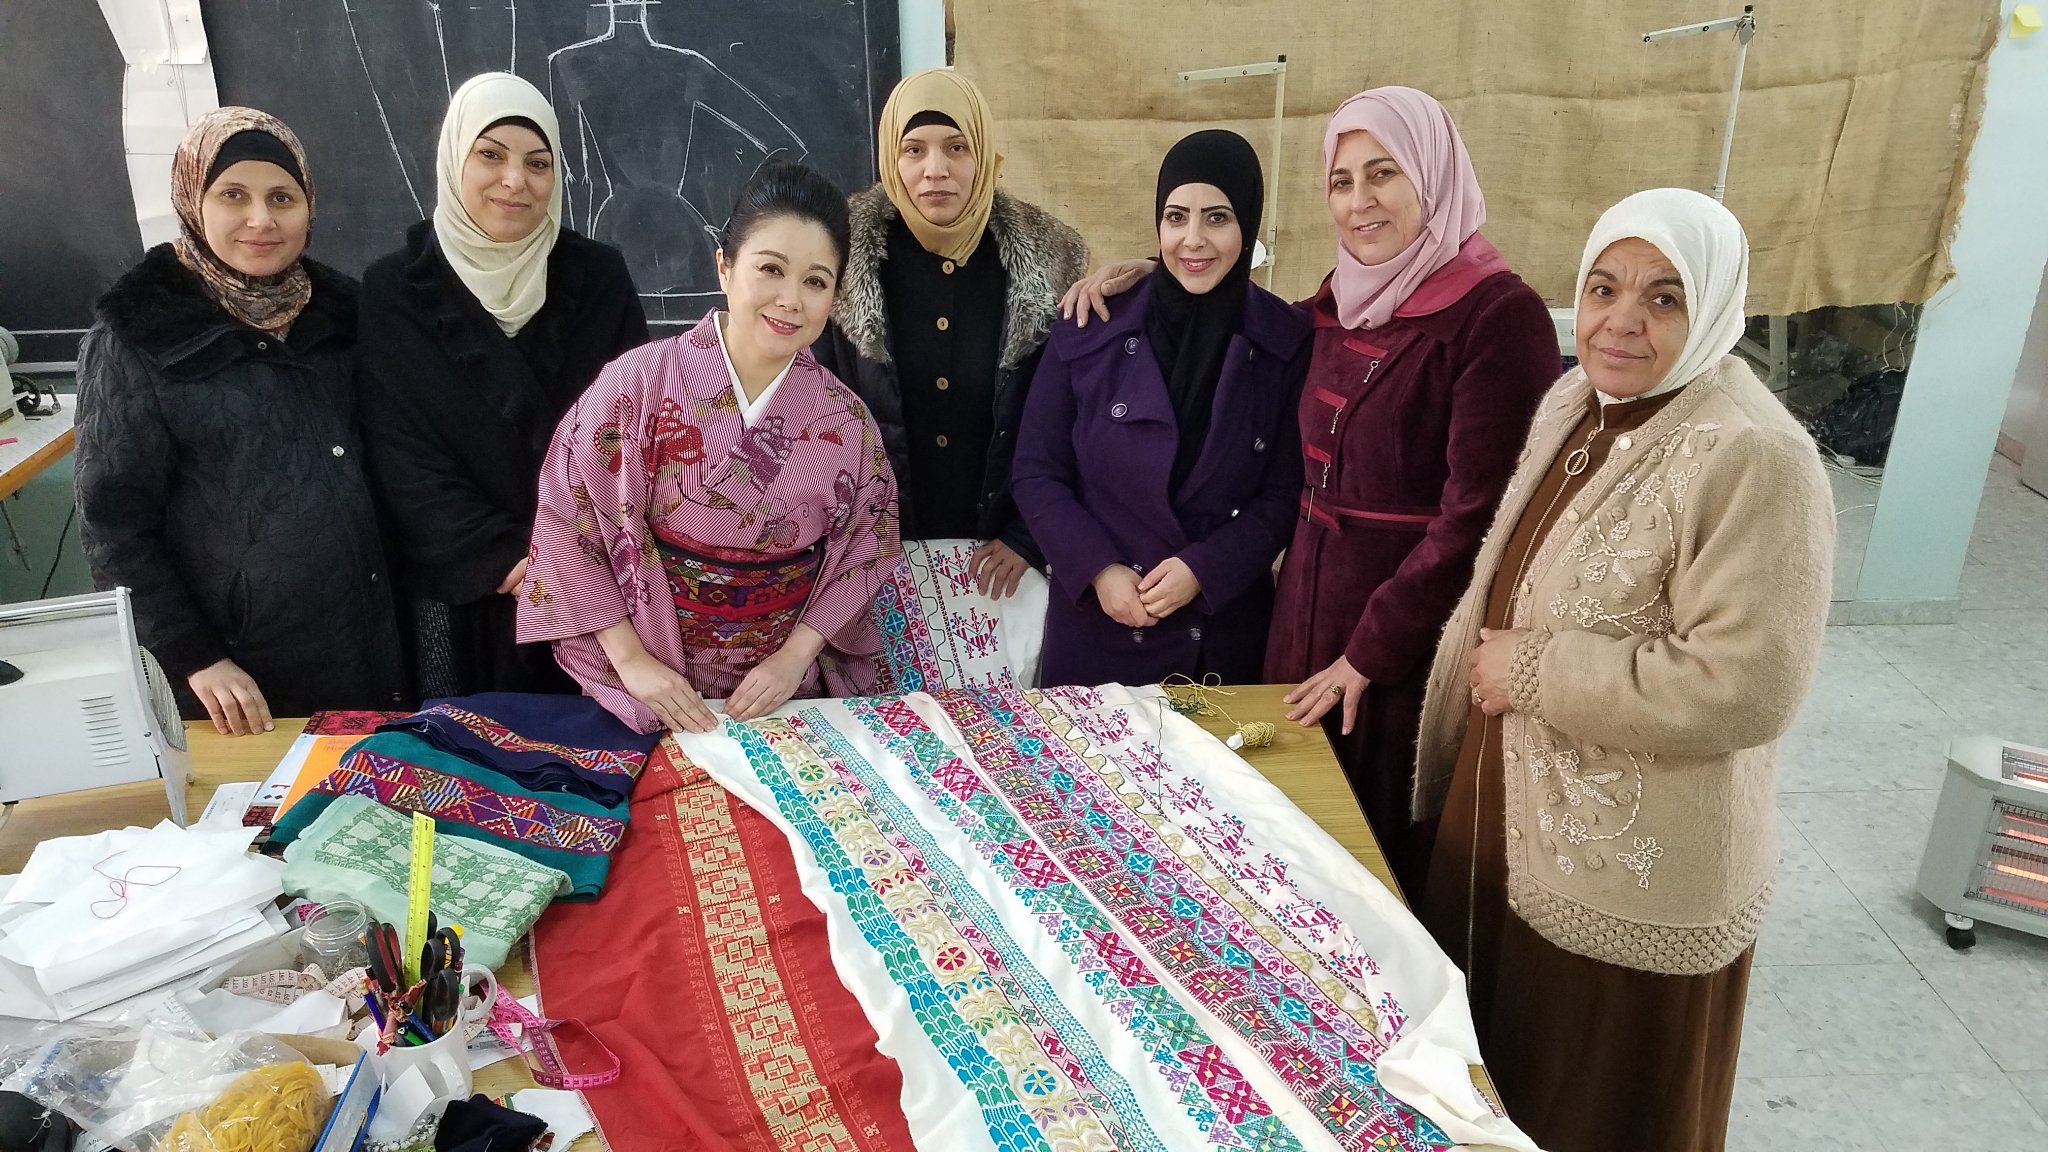 Yamamoto (third right) with Abu Shaweesh (second left) and other artisans in the Al-Amari refugee camp Ramallah (Credit: Palestinian Embroidery Obi Project)